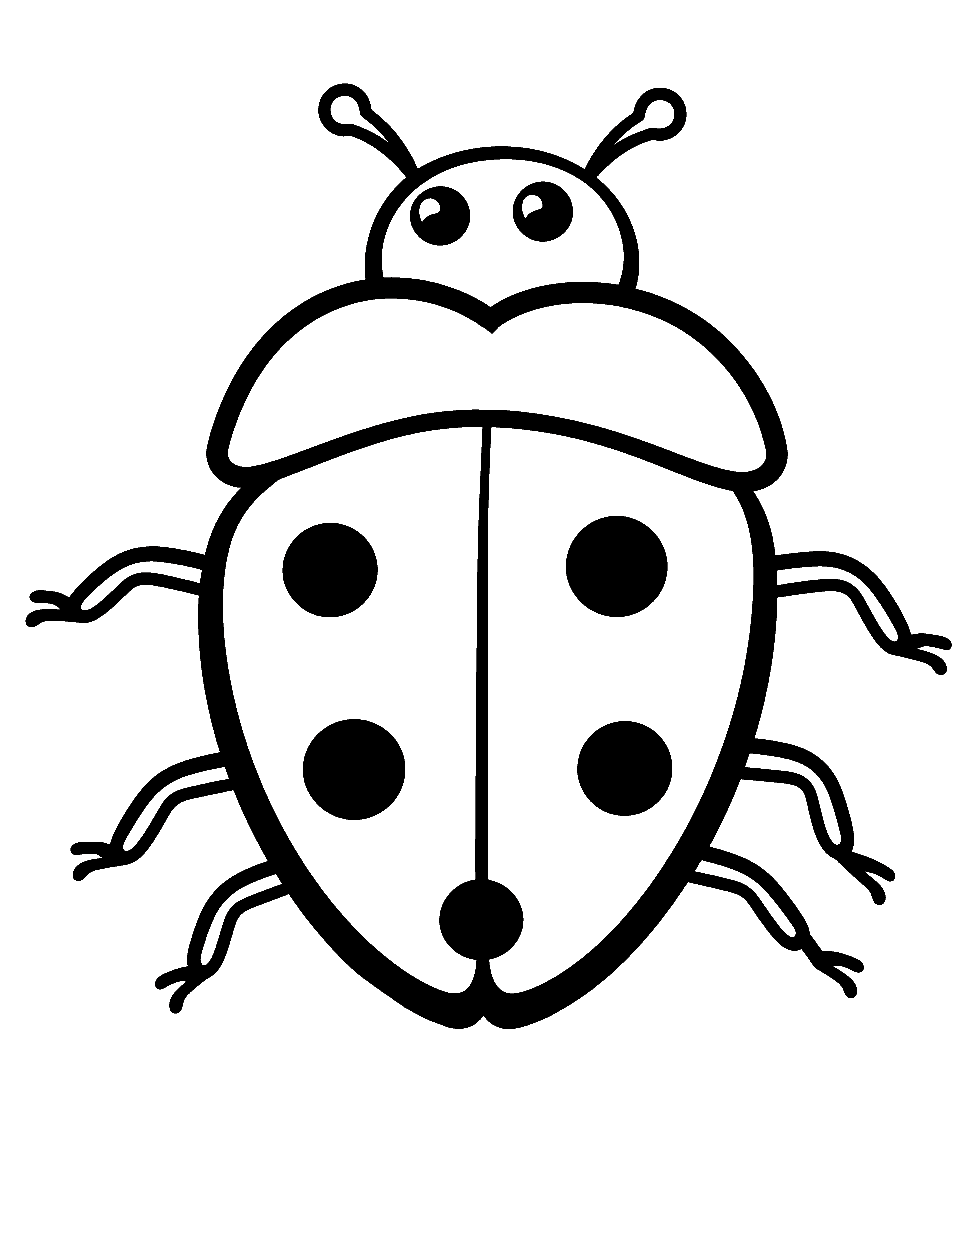 Simple Ladybug Outline Coloring Page - A basic outline of a ladybug, perfect for young children to color.